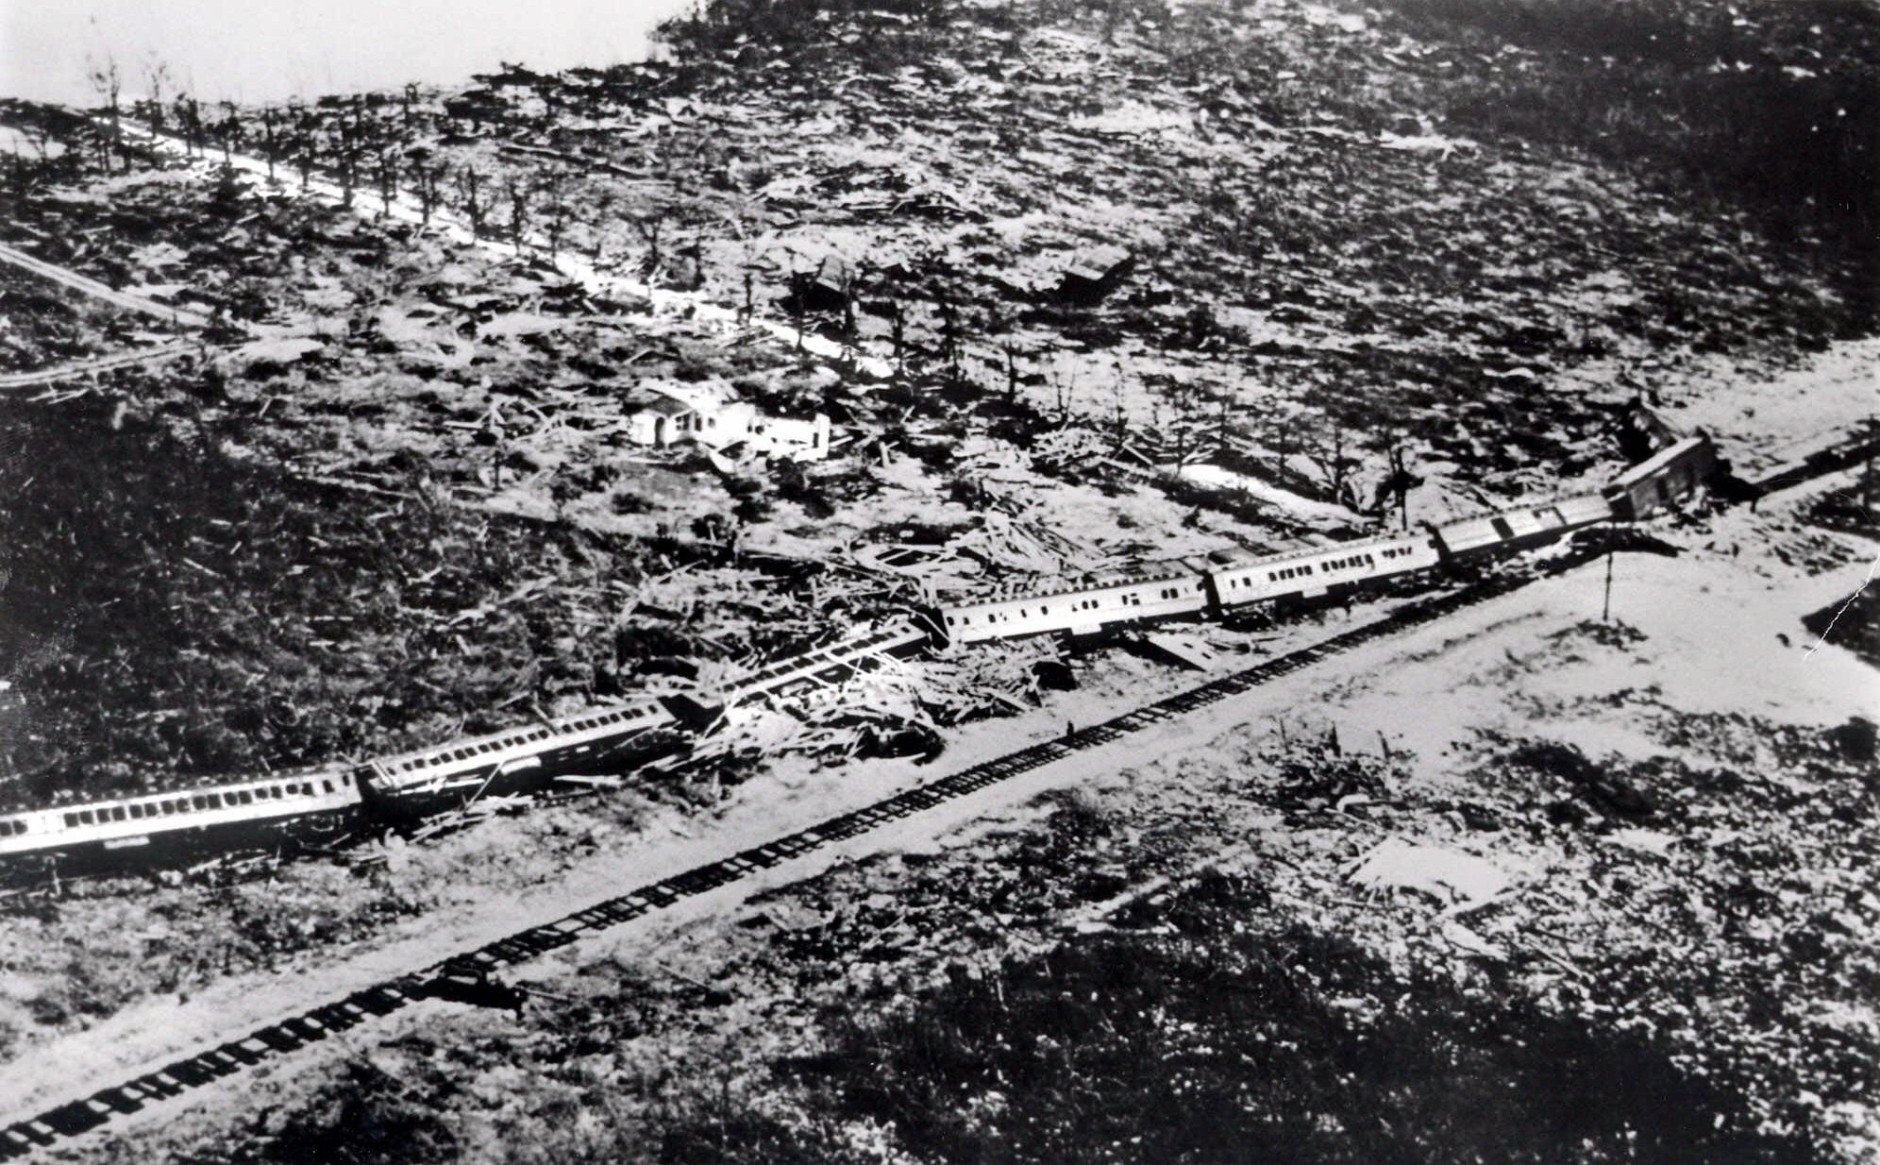 On this date in 1935, a Labor Day hurricane slammed into the Florida Keys, claiming more than 400 lives. Here, the wreckage of an 11-car passenger train is shown after the train was derailled by the hurricane.  (AP Photo)